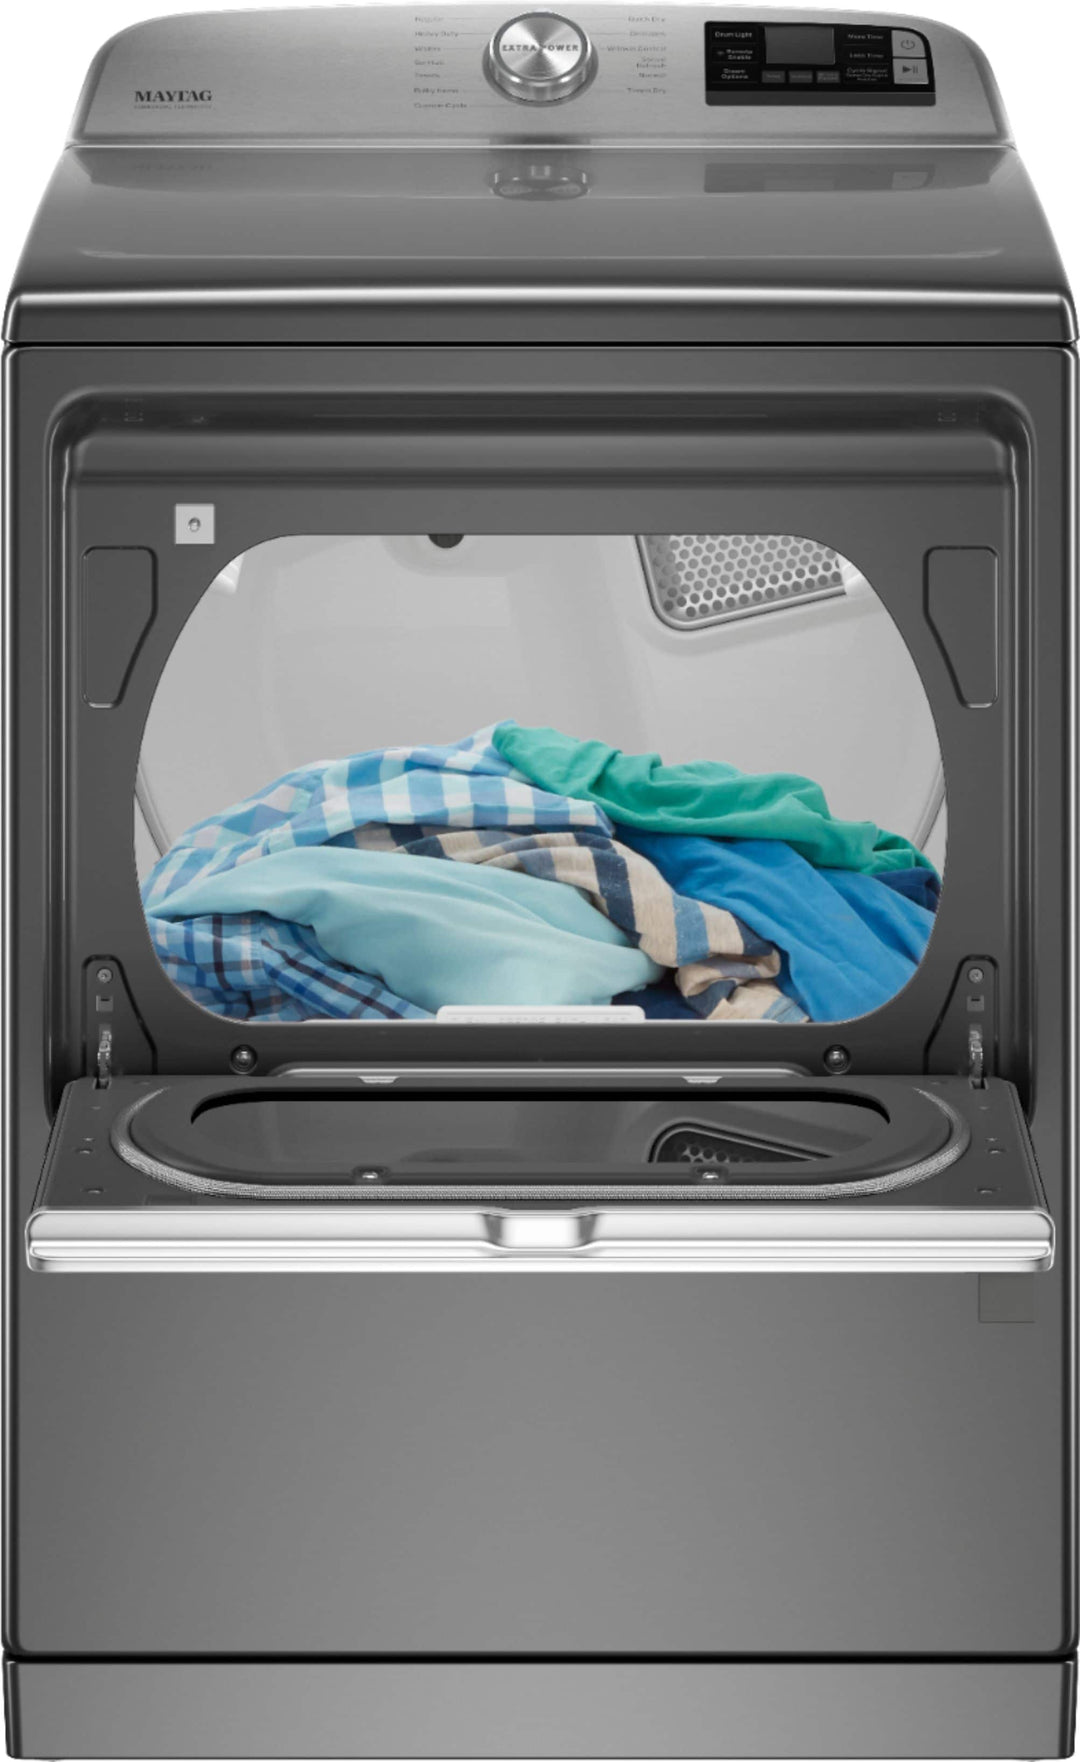 Maytag - 7.4 Cu. Ft. Smart Gas Dryer with Steam and Extra Power Button - Metallic slate_8